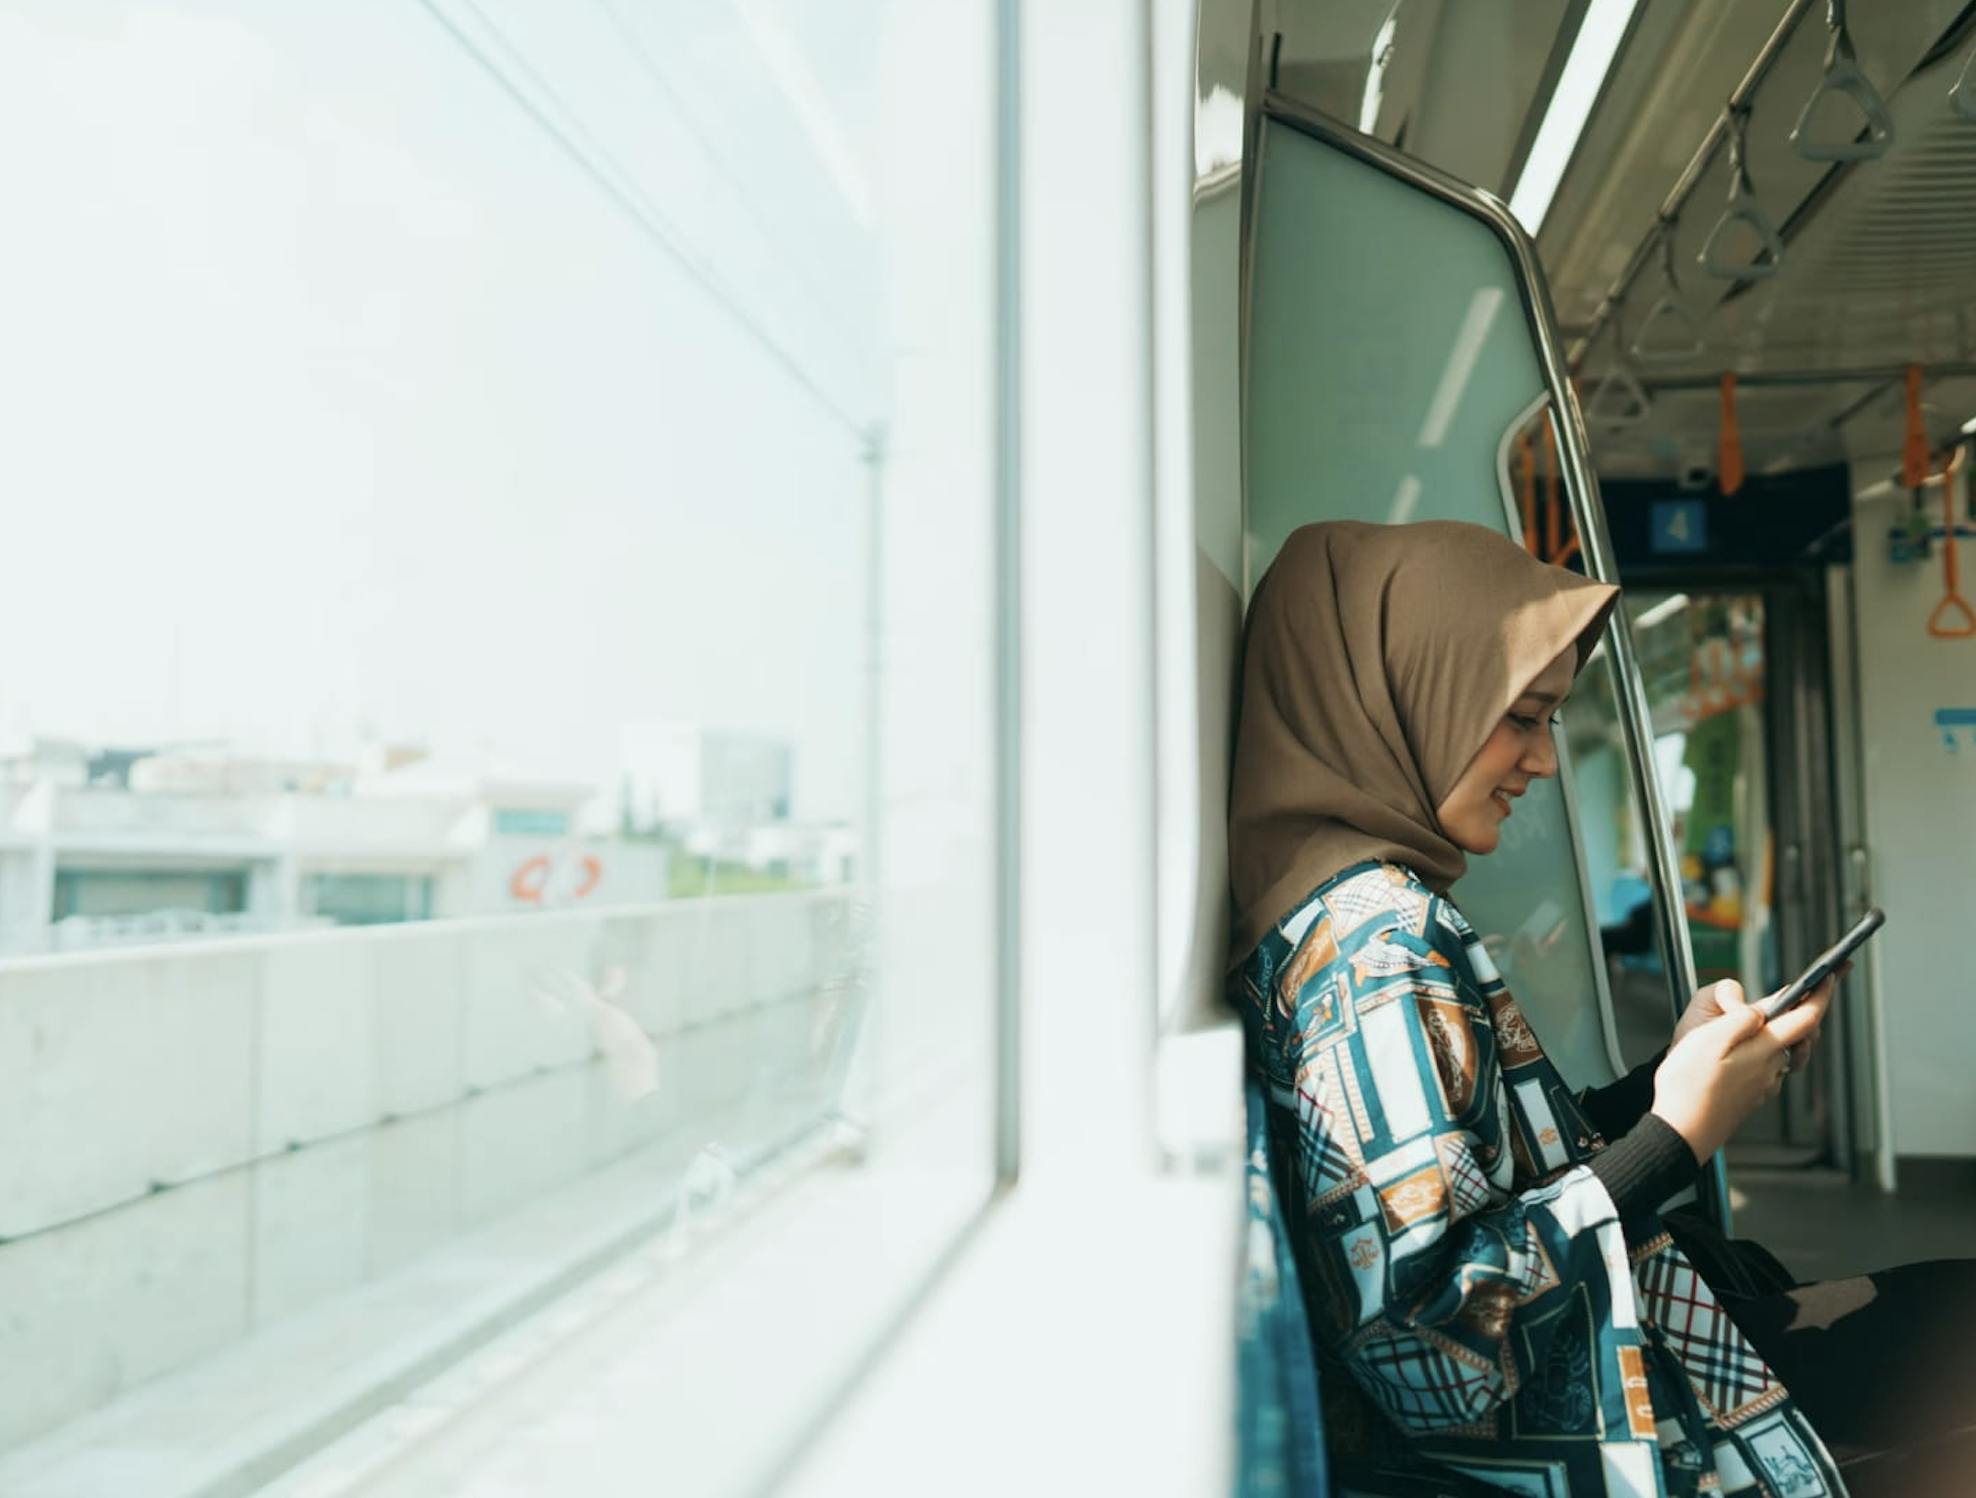 Woman looks at her mobile phone while riding a train, with a large window showing a city view next to her. 